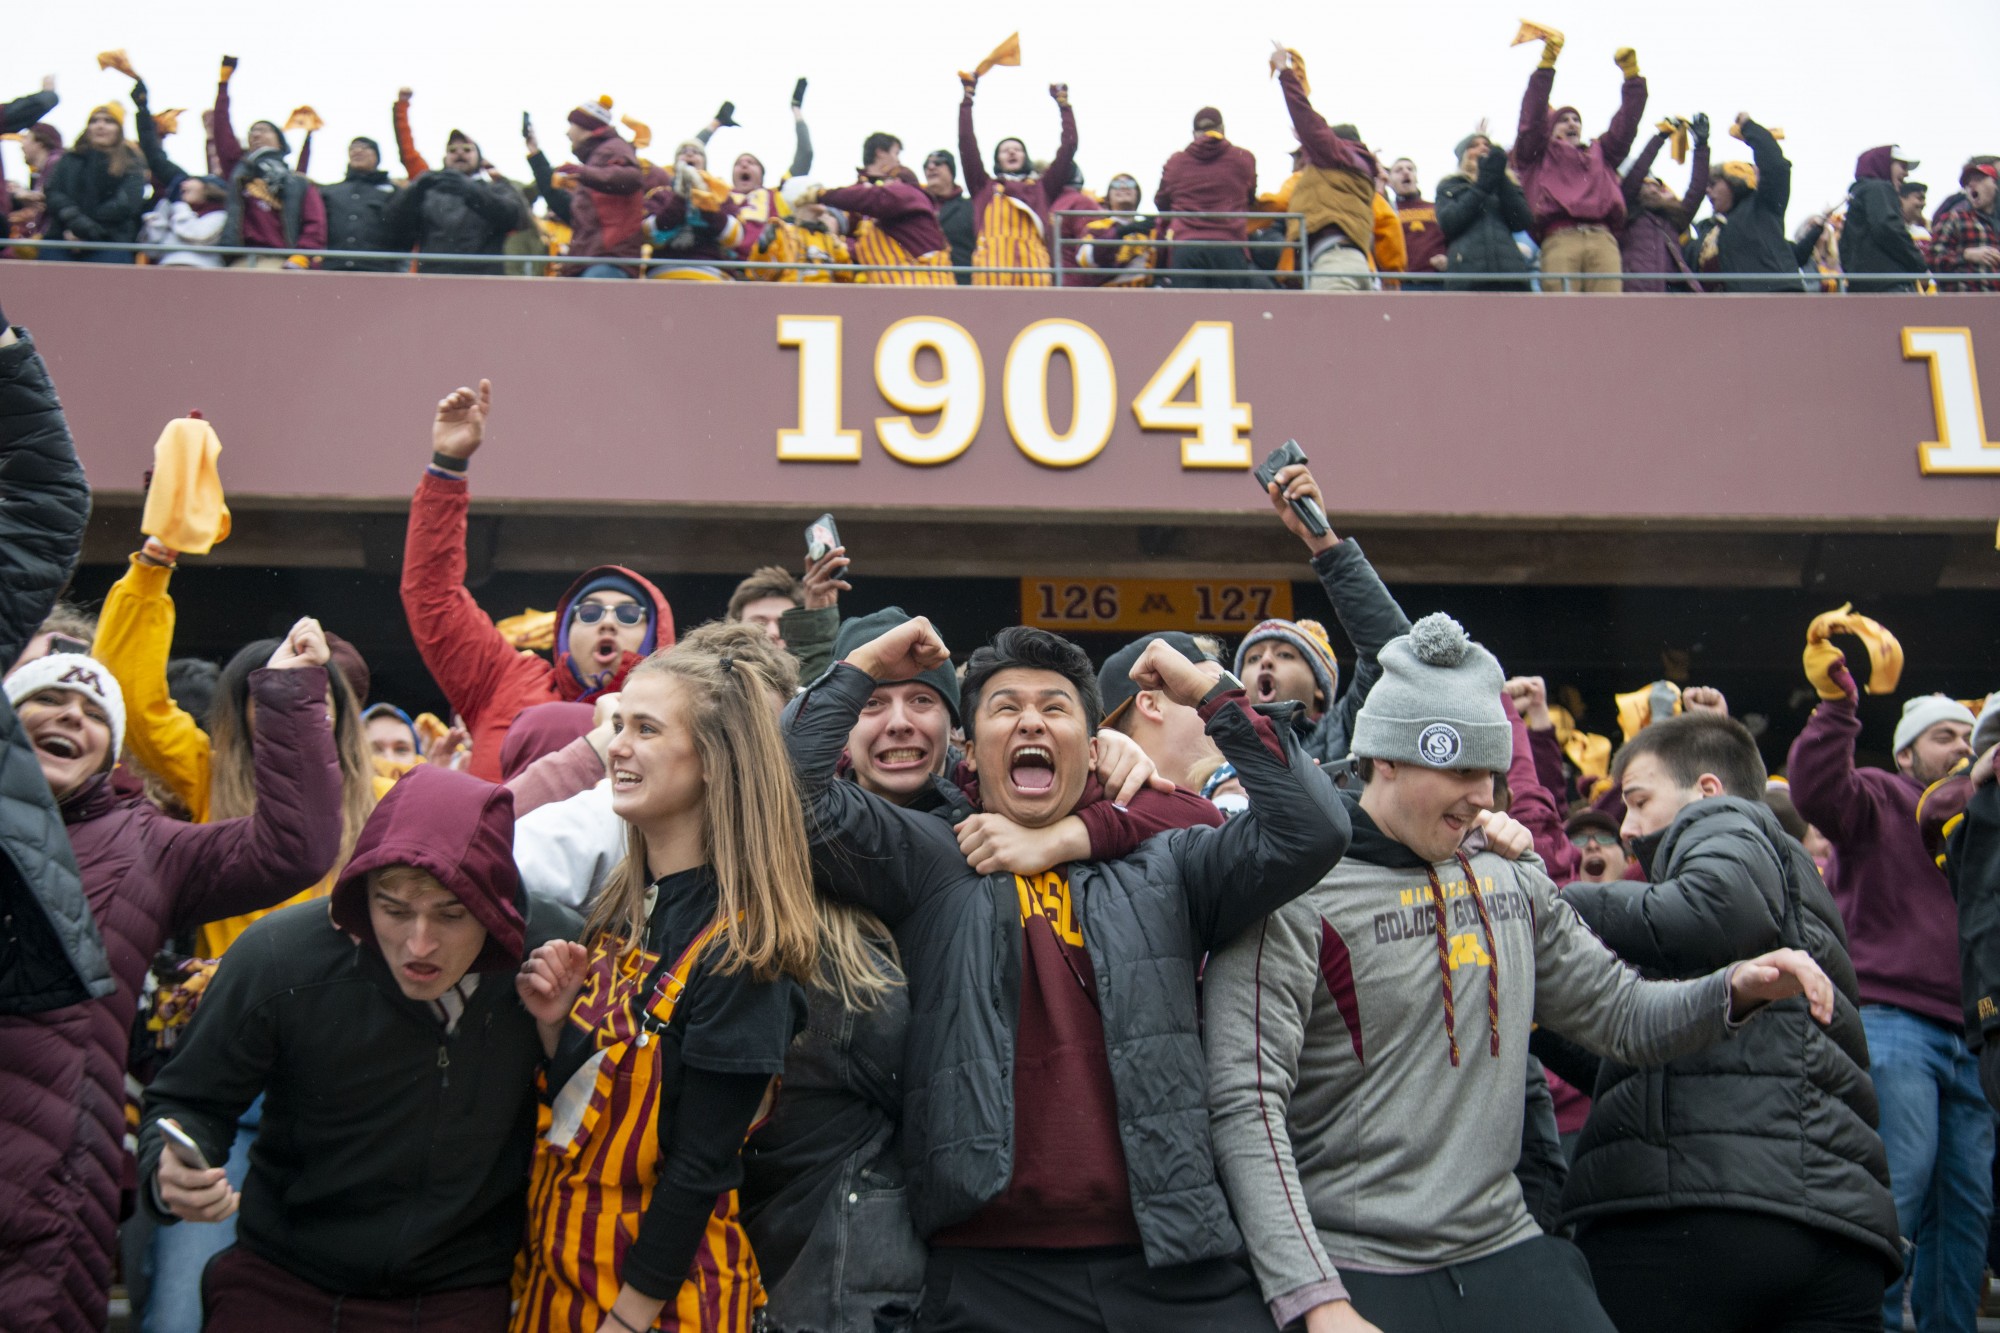 Fans cheer for the Gophers after winning the game against Penn State at TCF Bank Stadium Saturday, Nov. 9. The Gophers won 31-26 bringing their record to 9-0. A first since 1904.